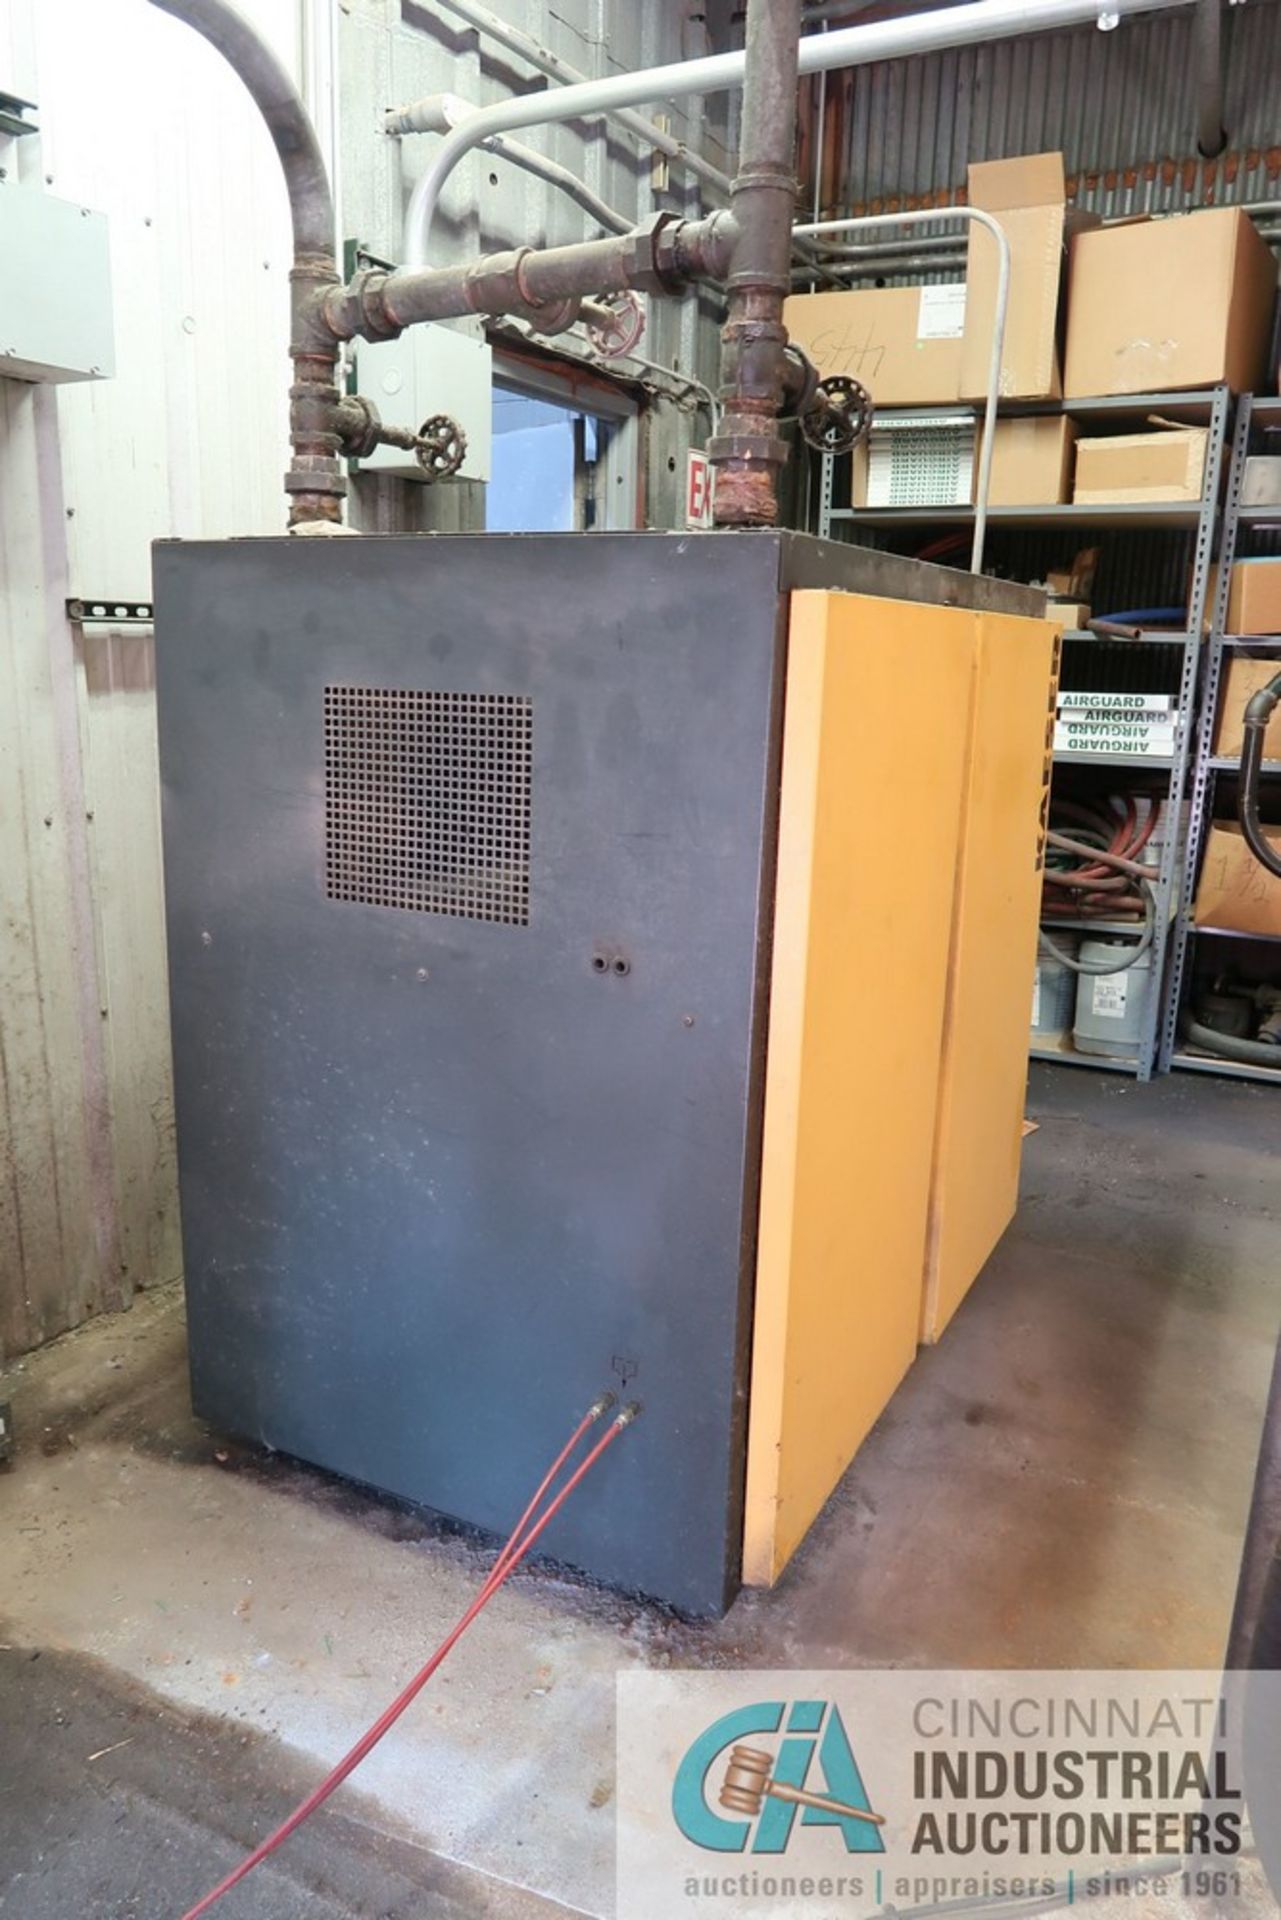 KAESER MODEL TE91 REFRIGERATED AIR DRYER; S/N 1977 (NEW 2015), R134A REFRIGERANT - Image 2 of 4